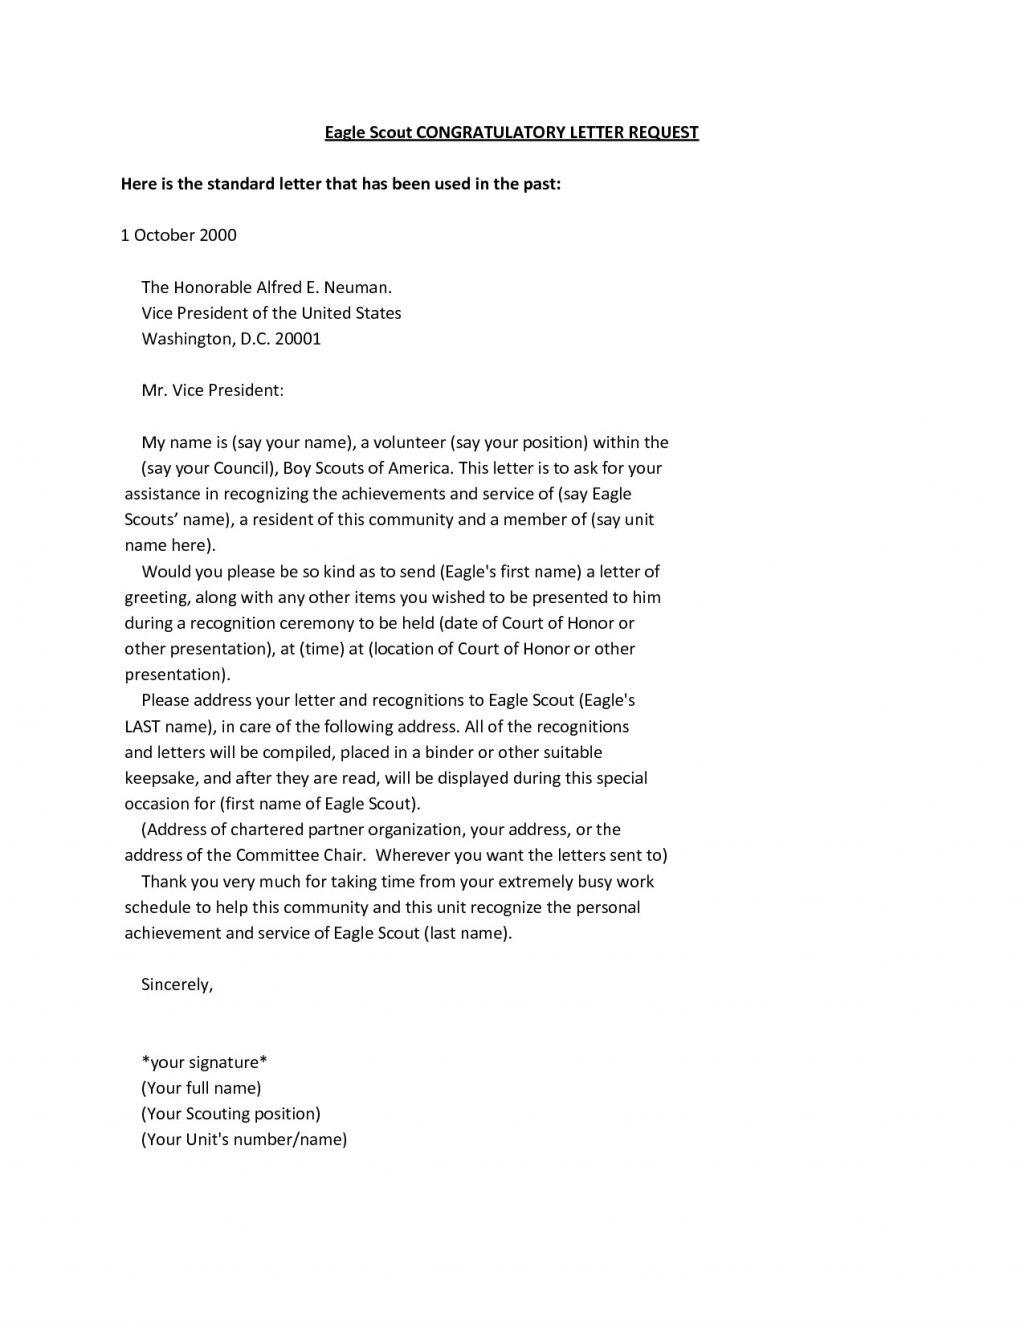 eagle recommendation letter template example-parent re mendation letter for eagle scout sample 10-b